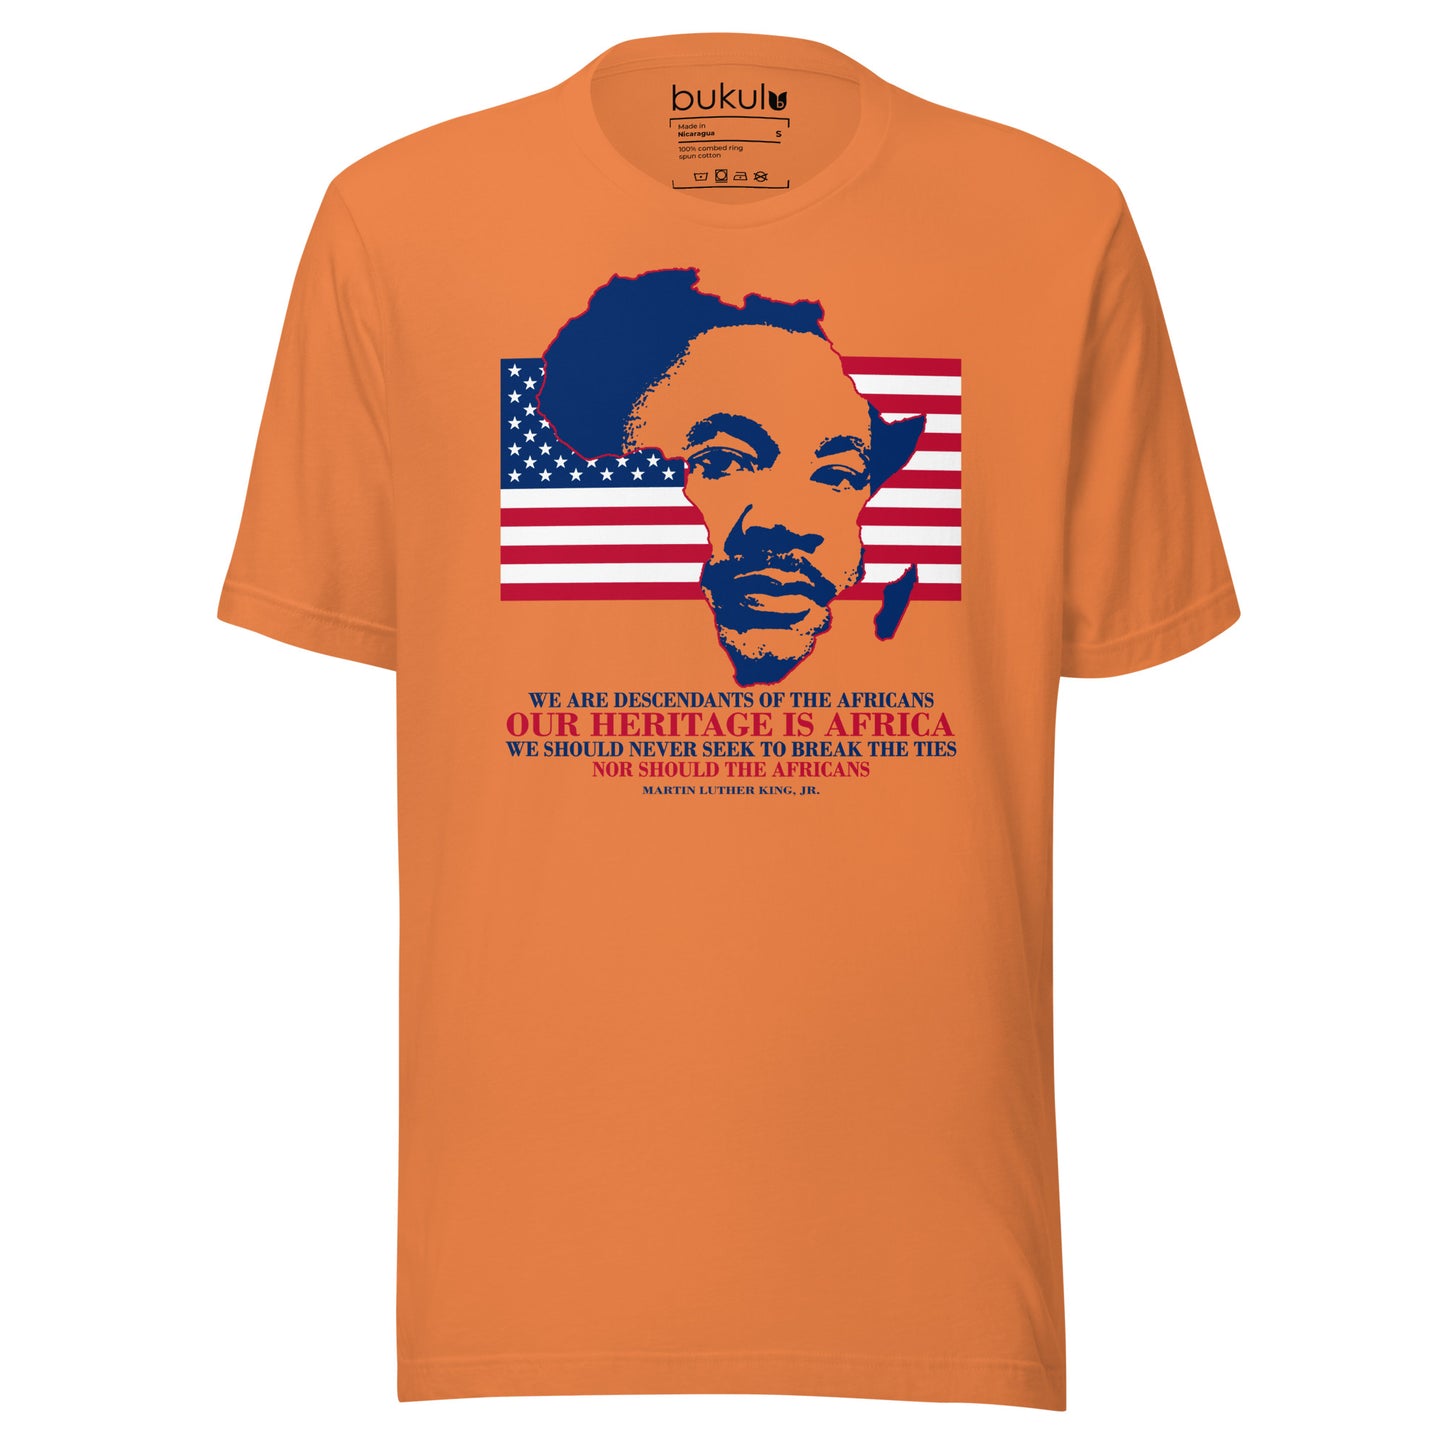 Martin Luther King Shirt for African Americans or Pan-Africanism Unisex - bukulu